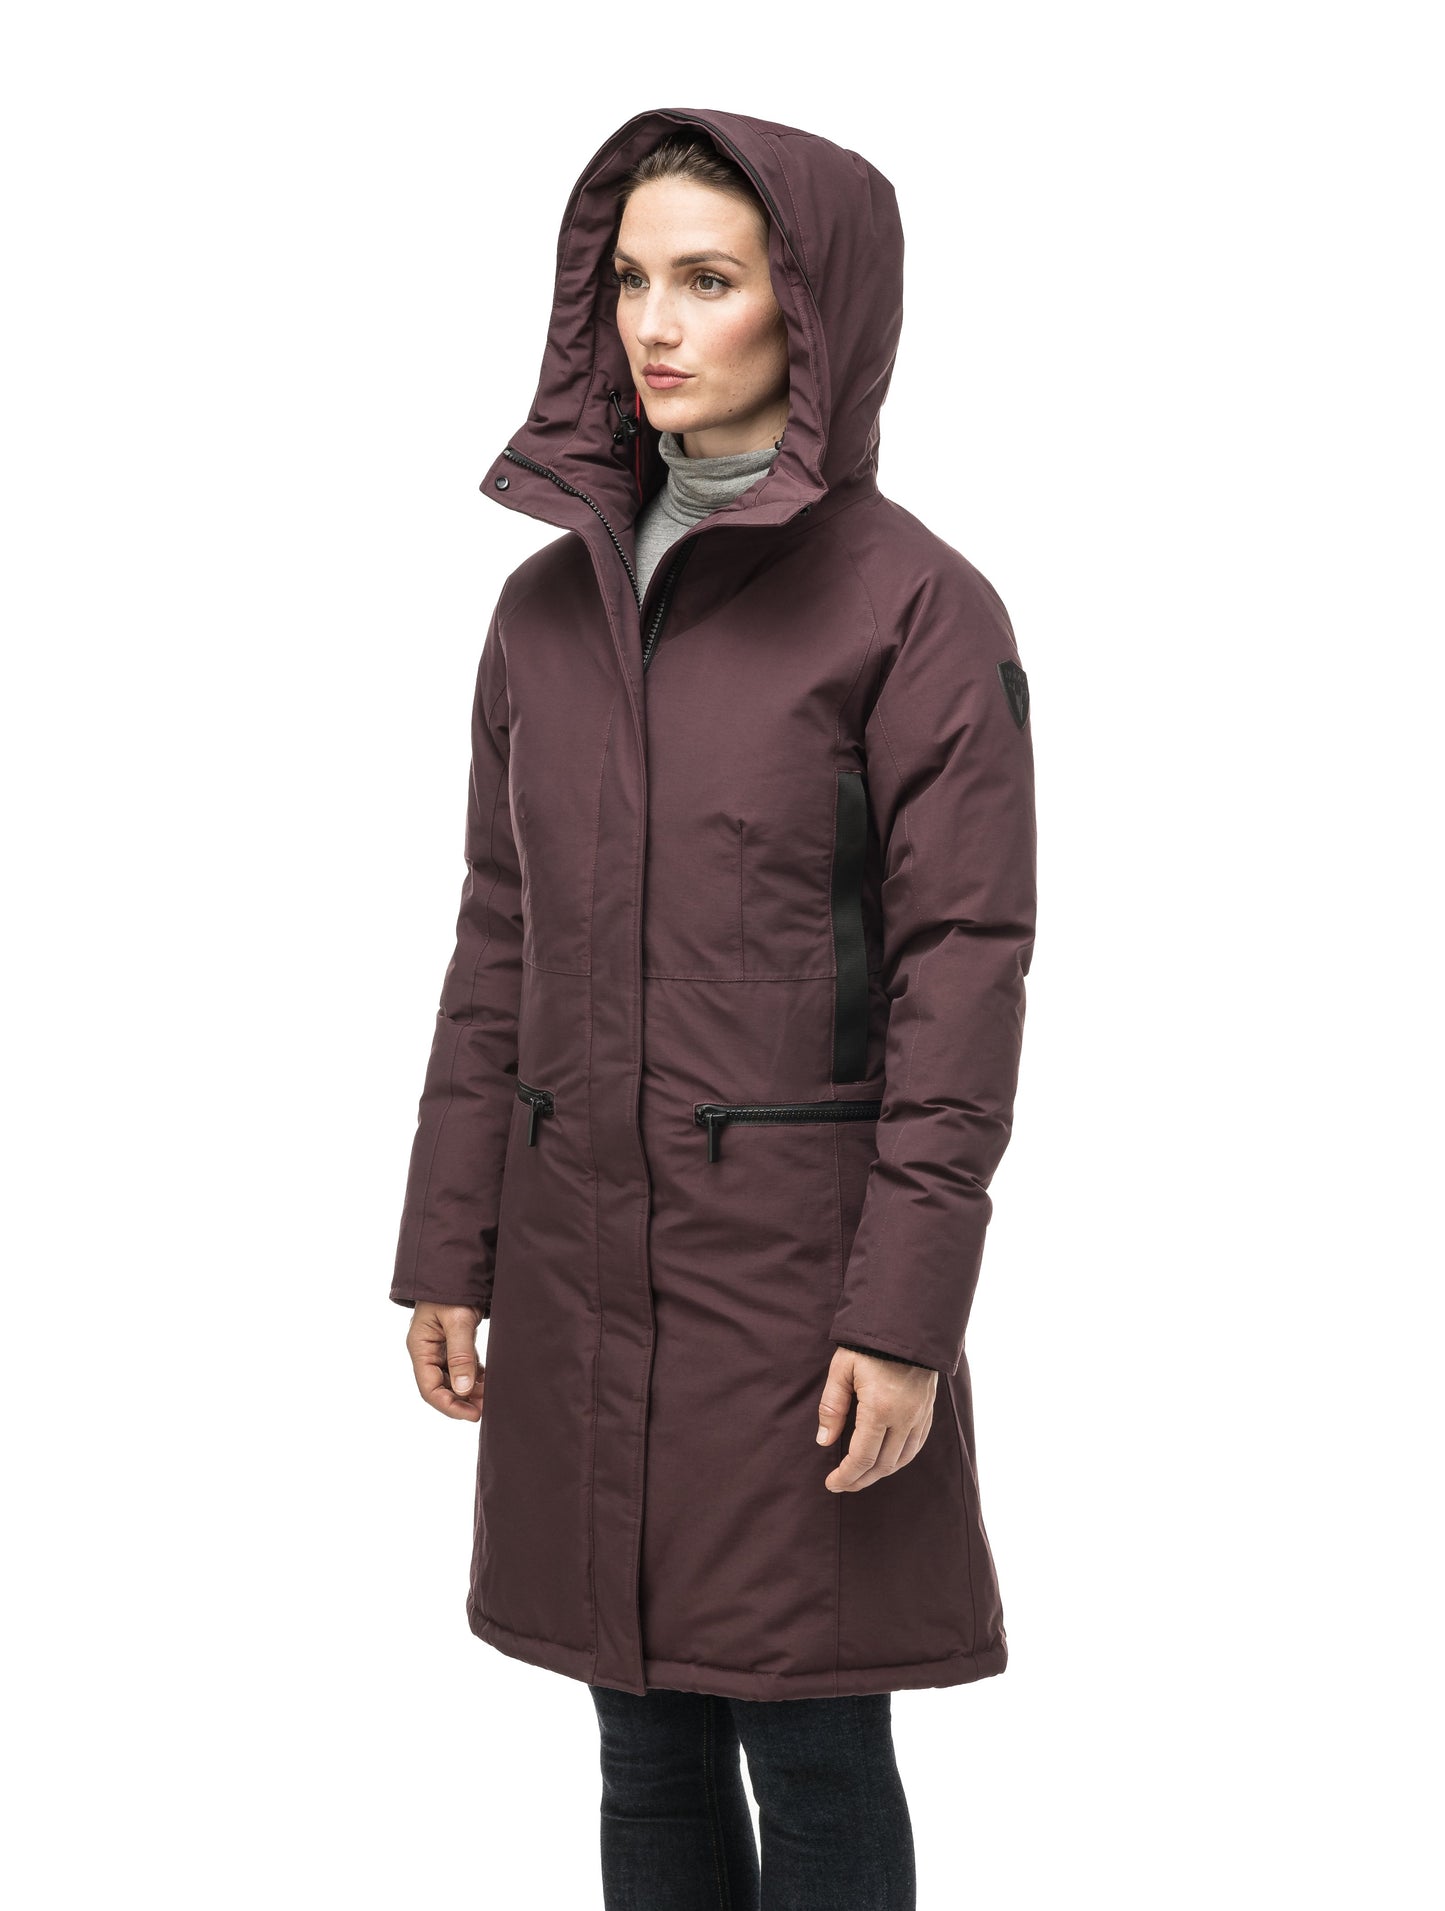 Knee length women's down filled parka with contrast ribbon accents and removable fur trim on the hood in Burgundy